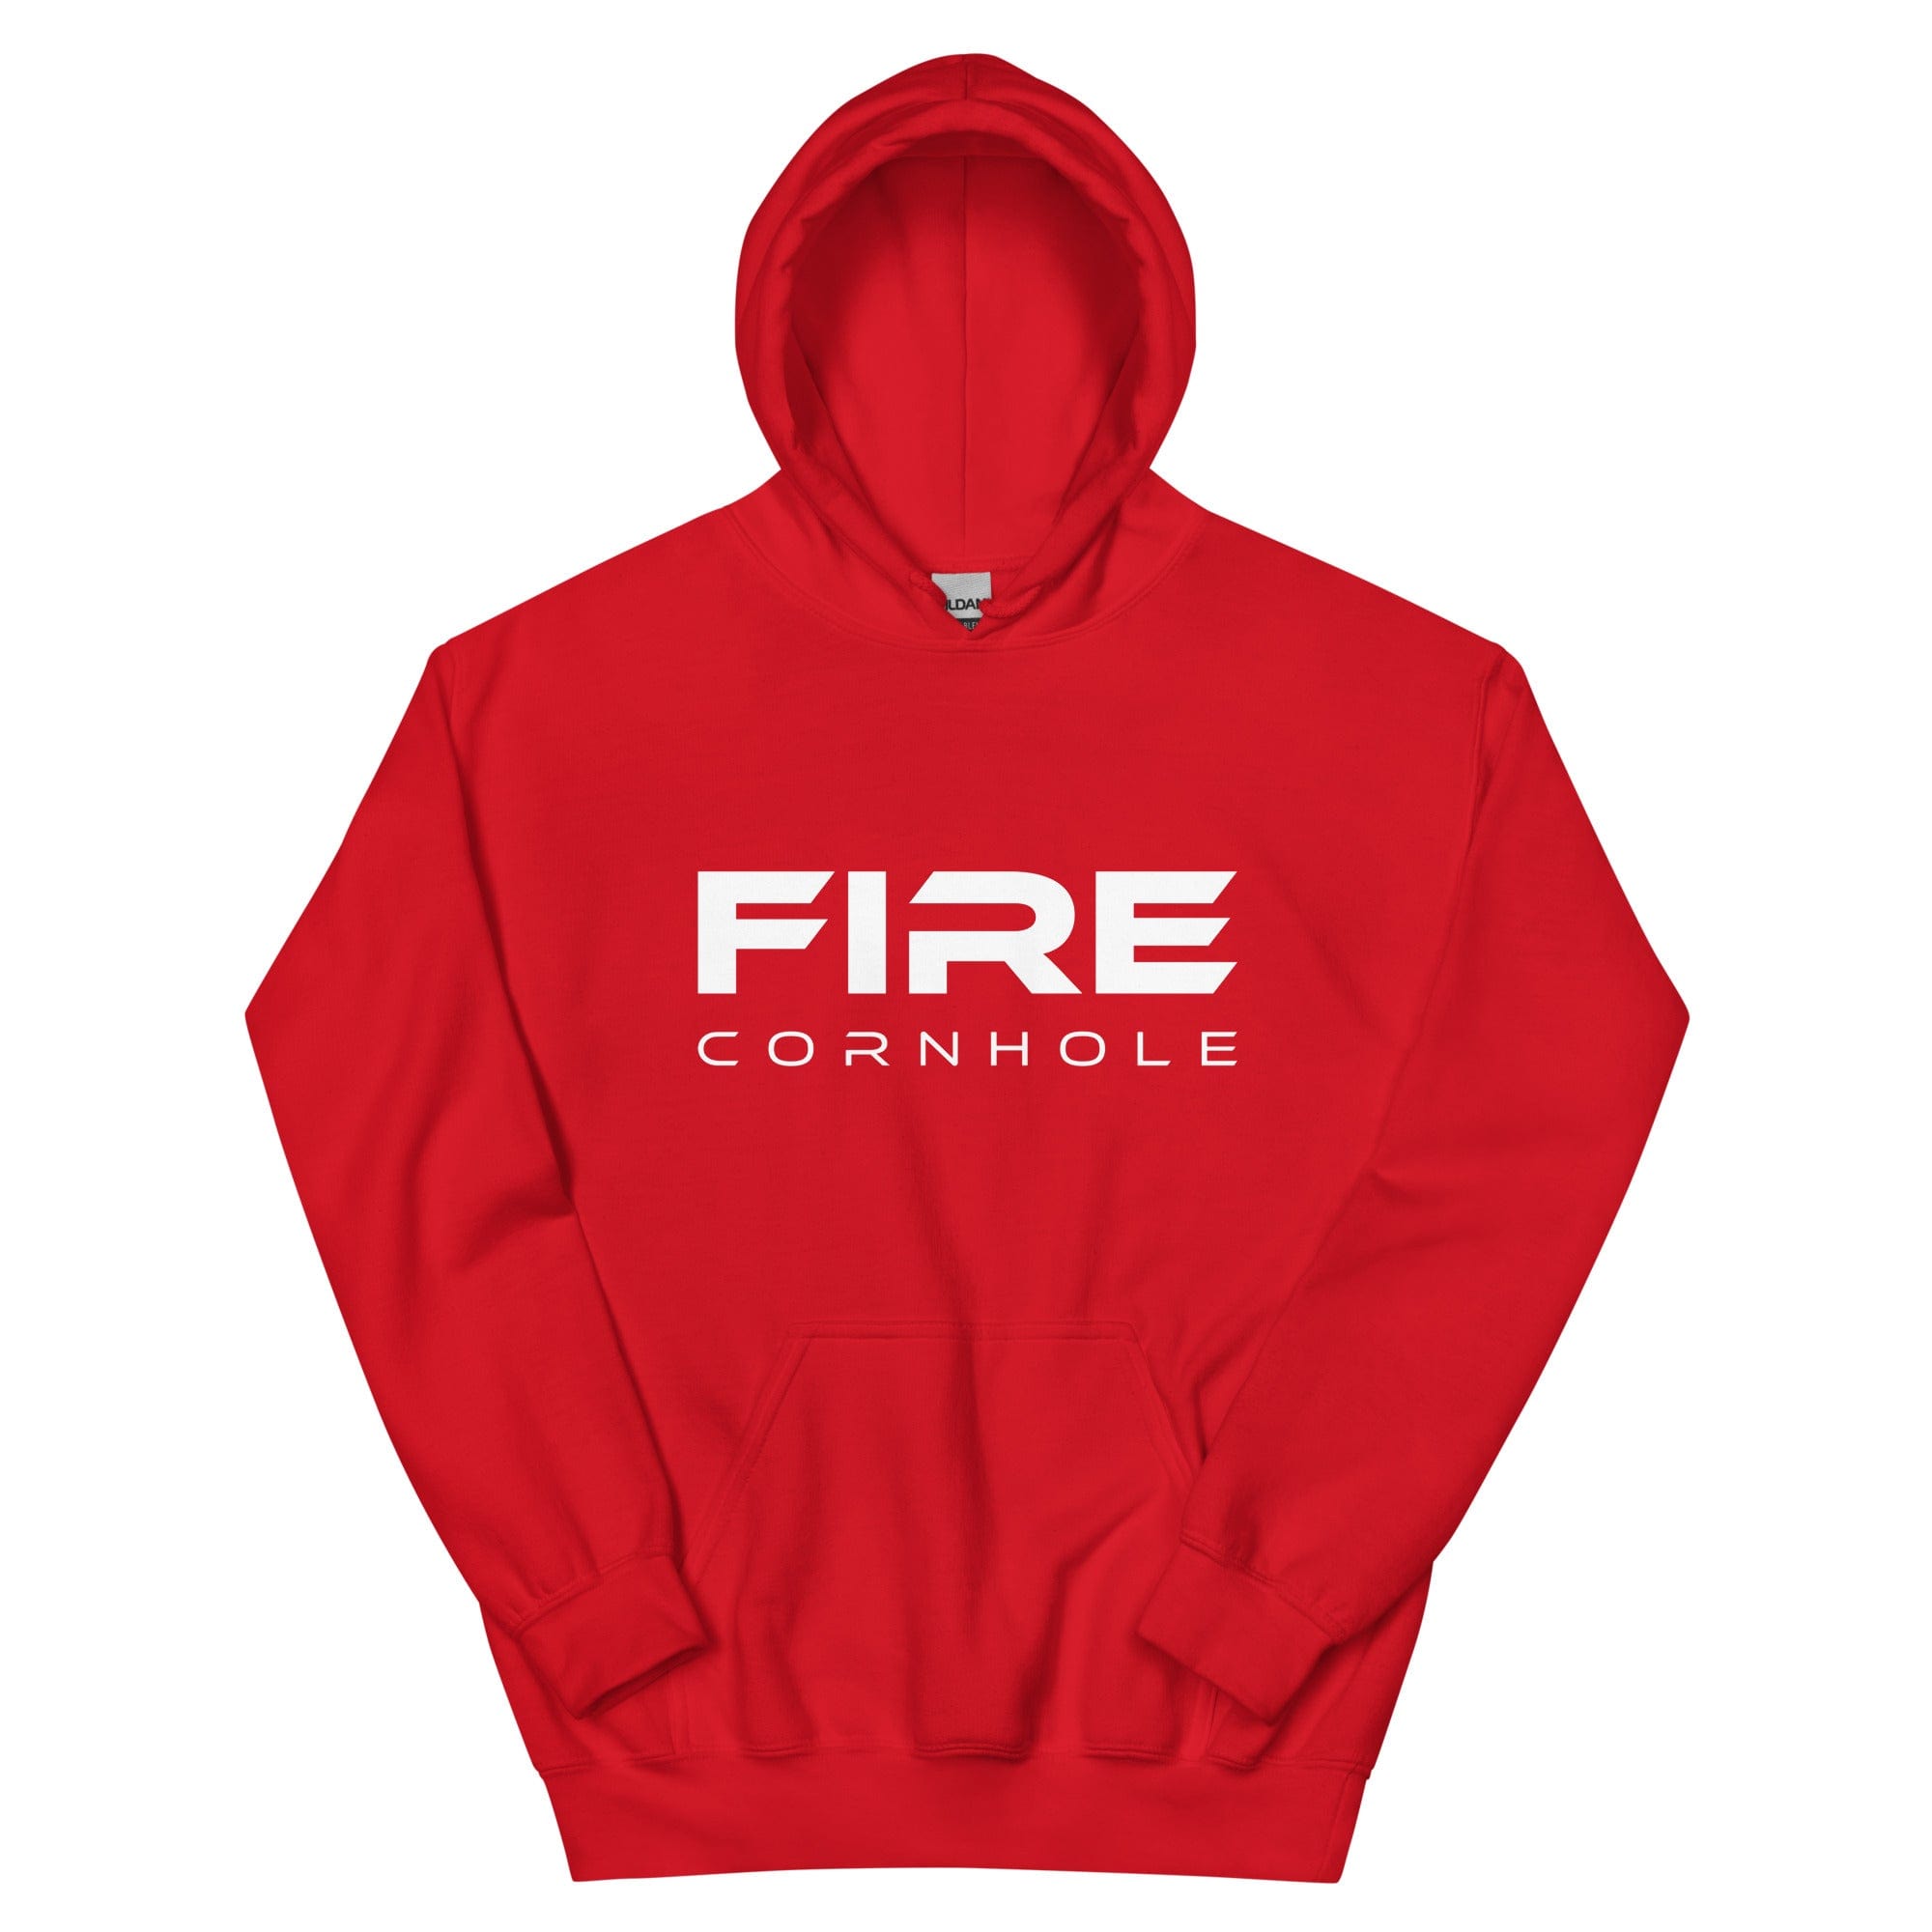 Red unisex cotton hoodie with Fire Cornhole logo in white